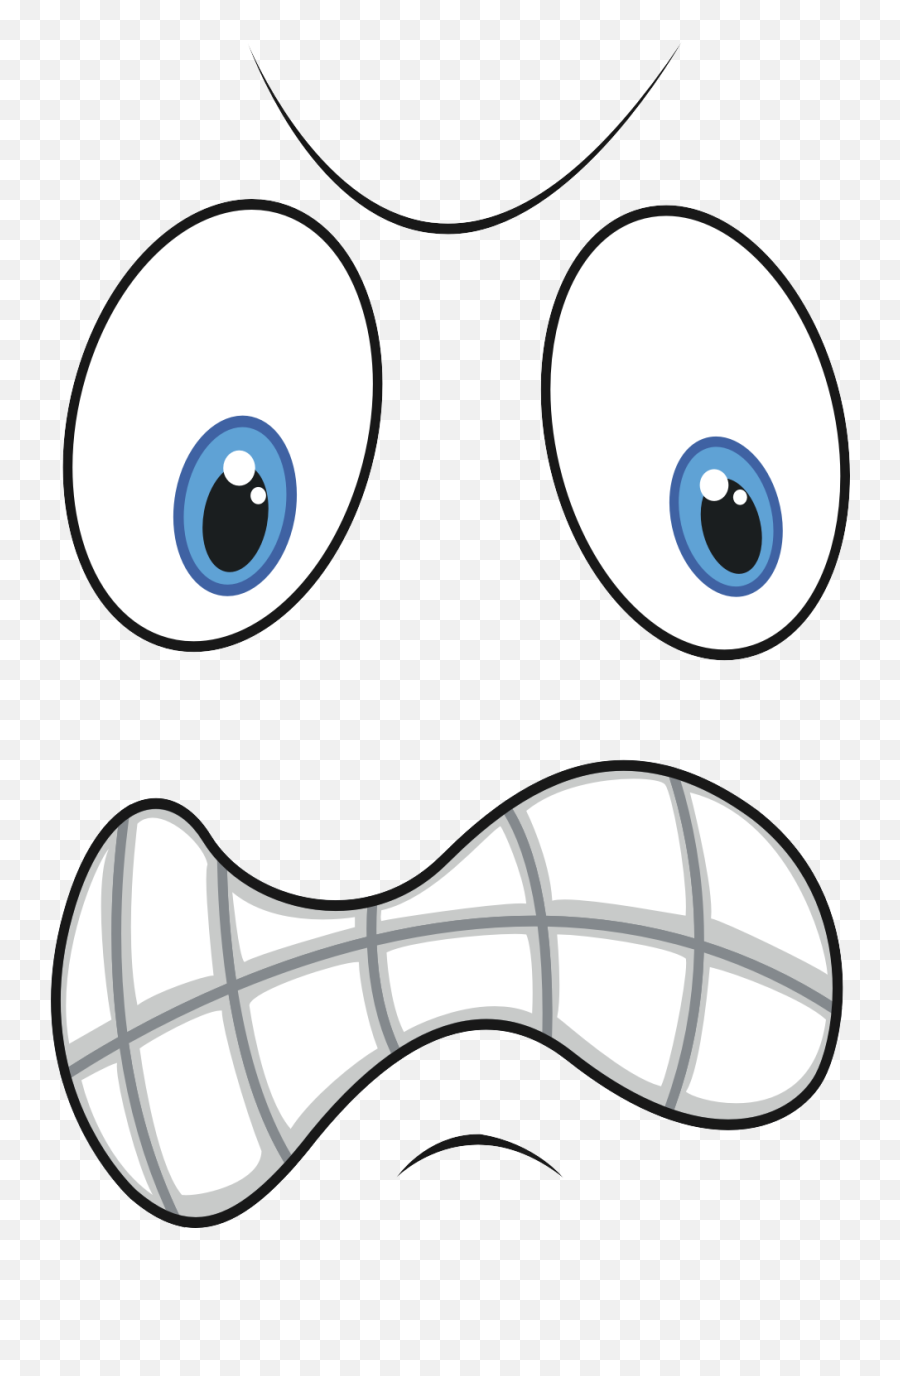 Anger Clip Art - Cartoon Faces Png Download 9651434 East Fortune Emoji,Angry Anime Emojis No Background